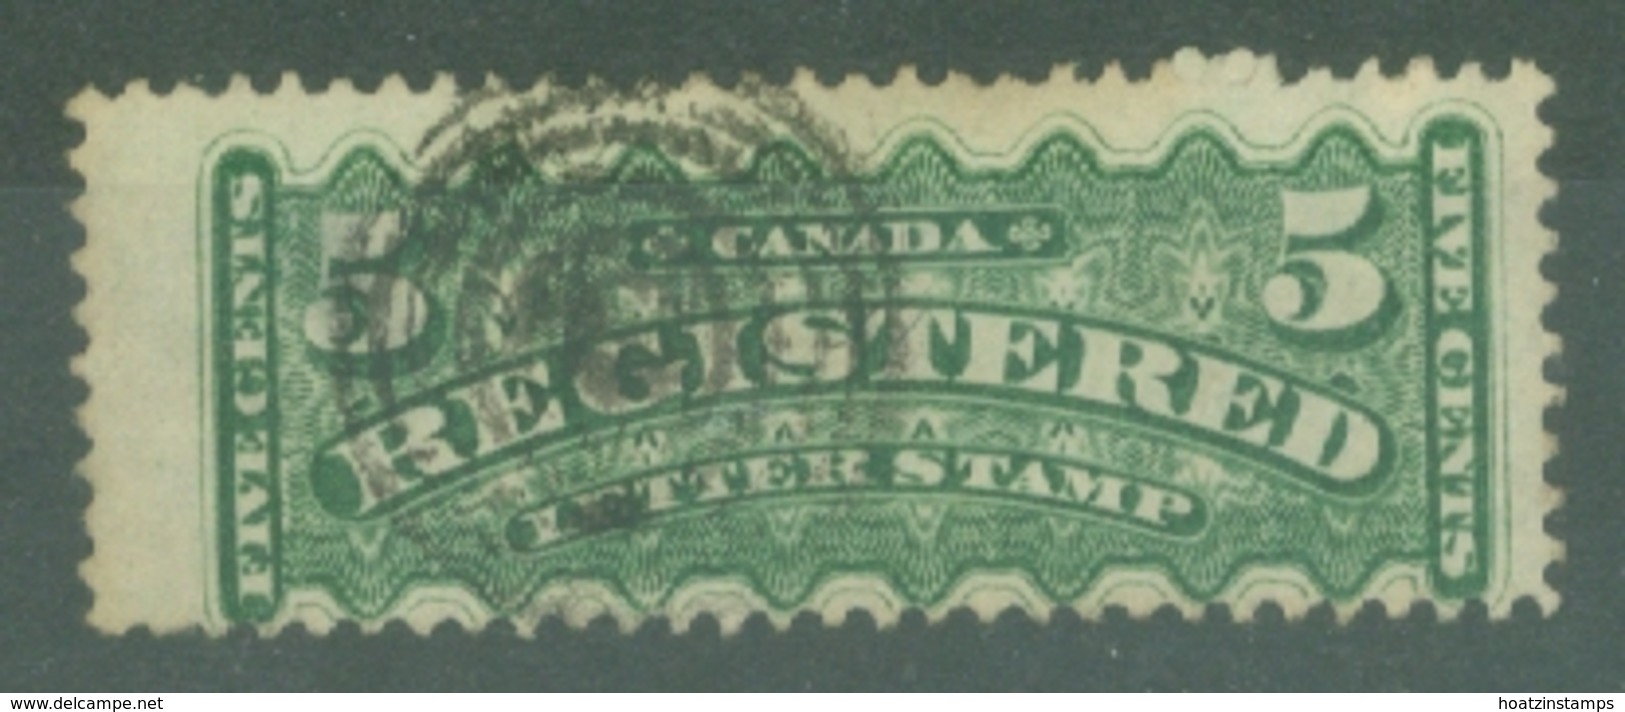 Canada: 1875/92   Registration Stamp   SG R7a    5c   Dull Sea-green   Used - Registration & Officially Sealed